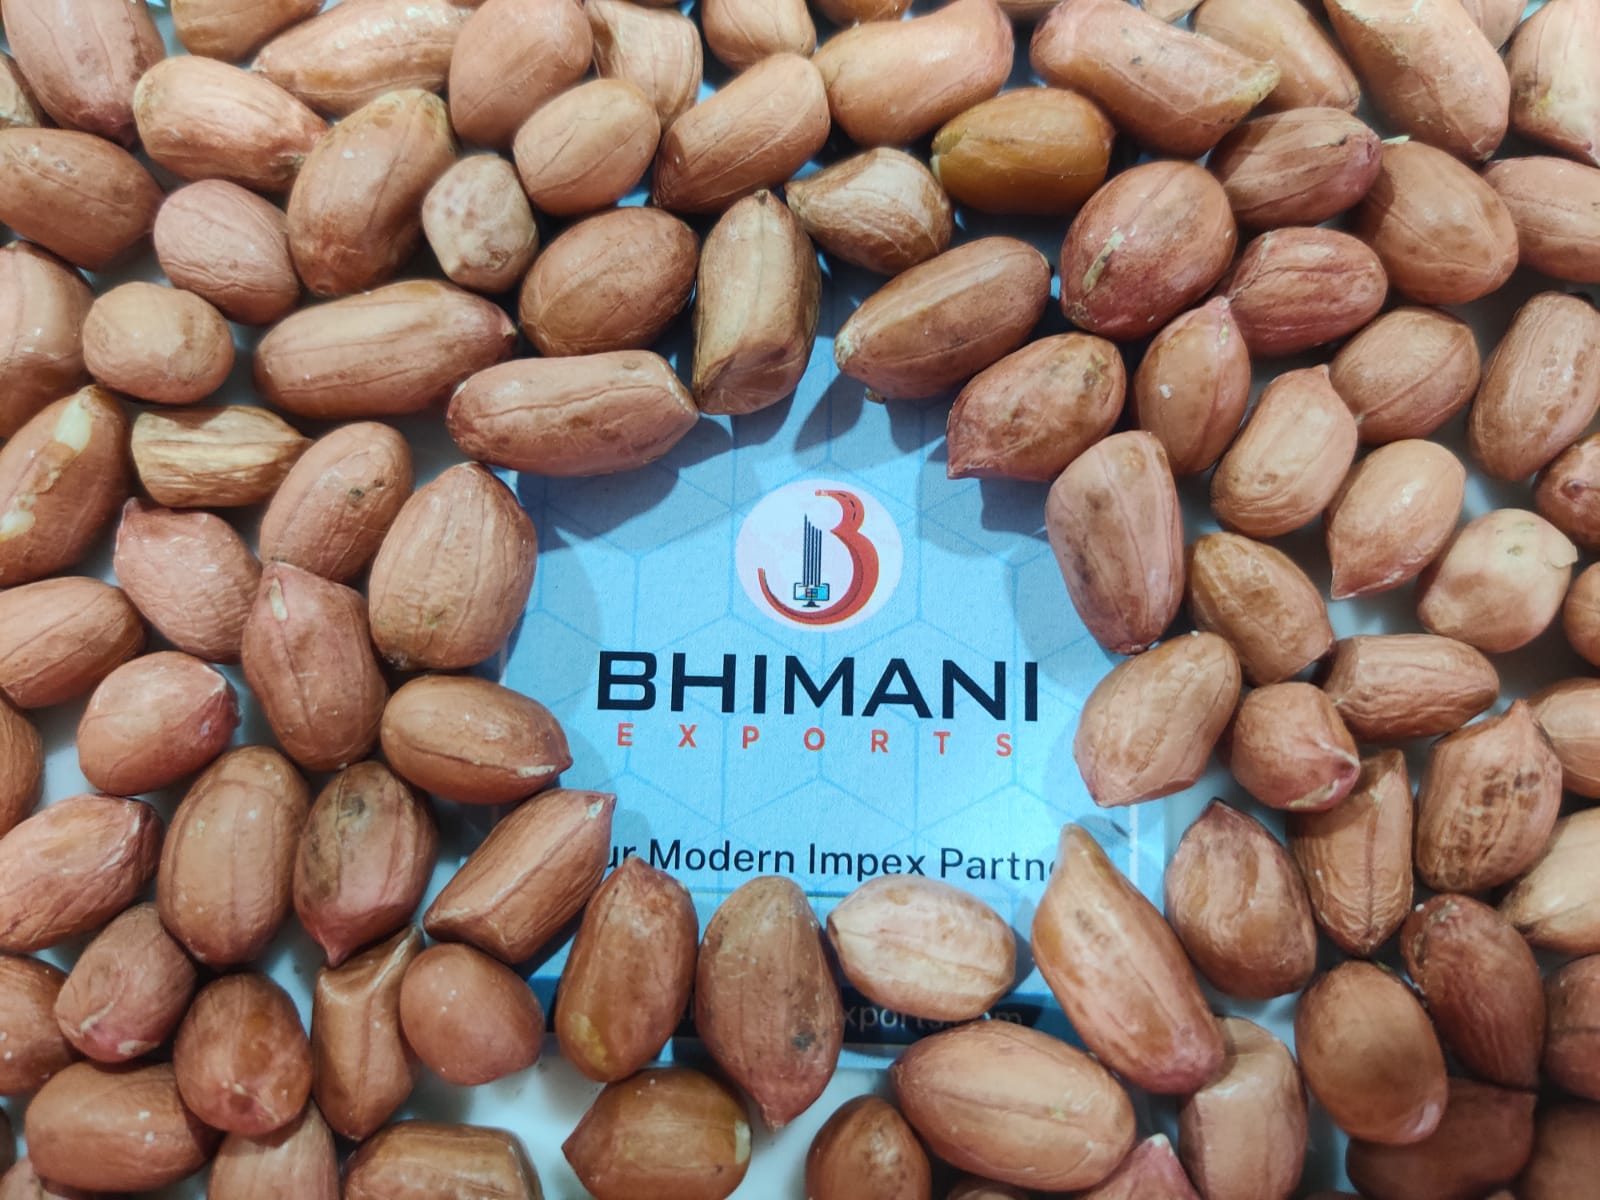 Peanut seeds supplier, producer, and exporter